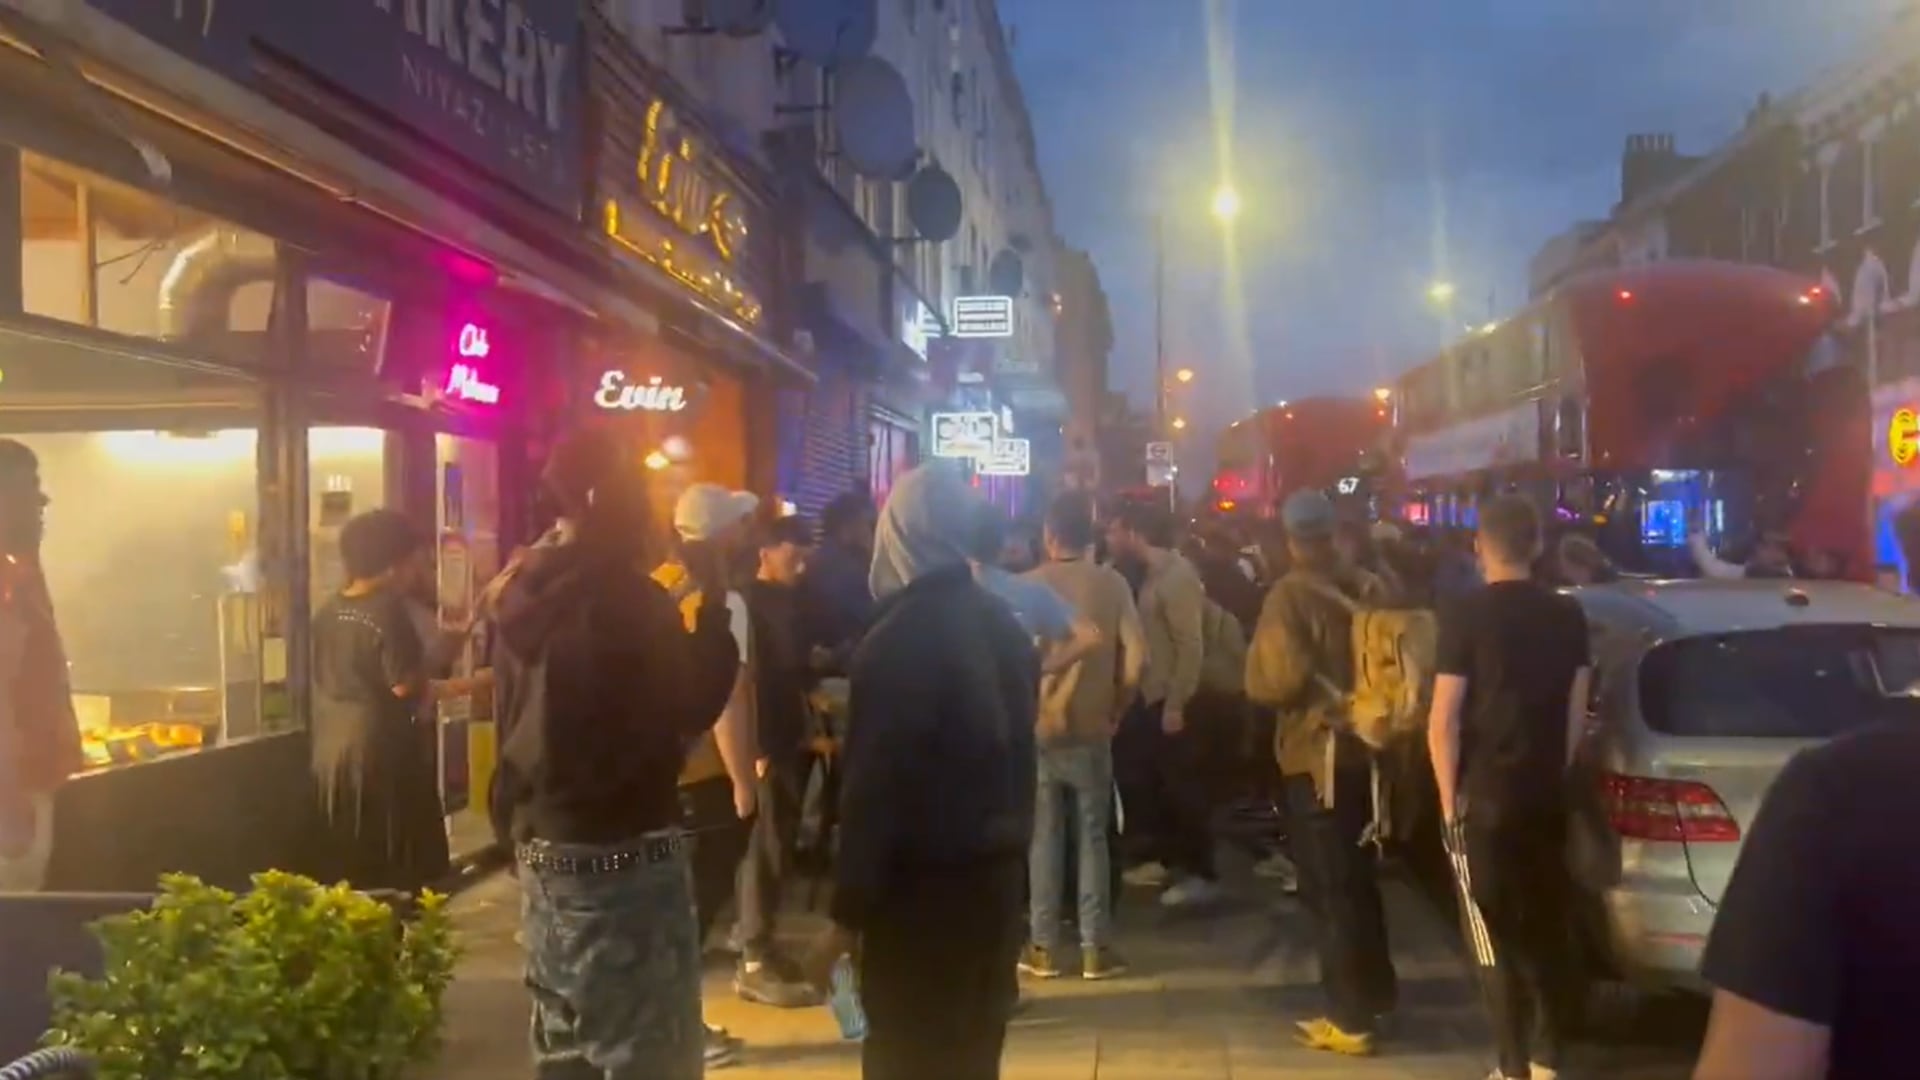 Crowds gathered outside a restaurant in Hackney after a shooting which injured three adults and a child (Ayo Adesina)